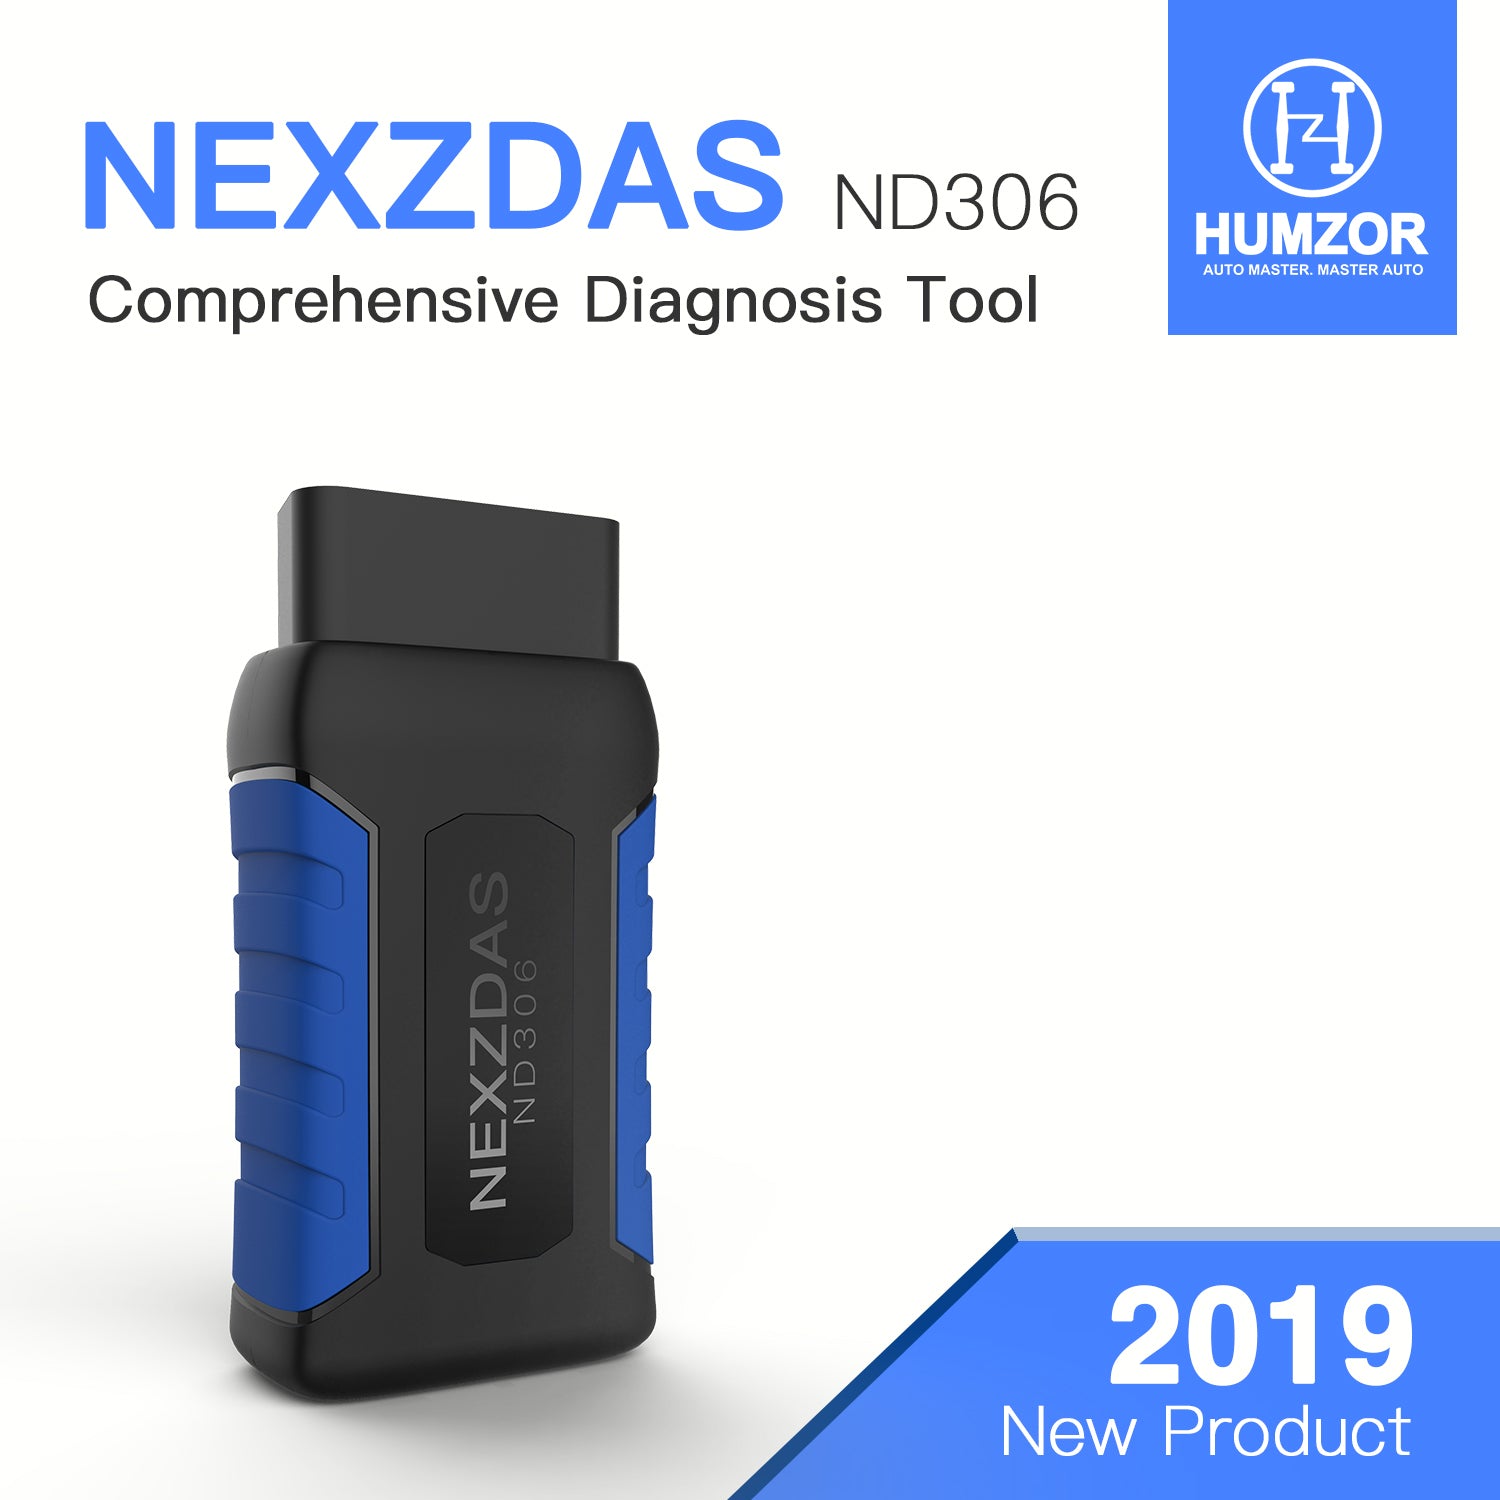 Humzor NexzDAS ND306 Full-system Auto Diagnosis Tool Car Code Reader for Gasoline Passenger Cars with ABS, TPMS, DPF...